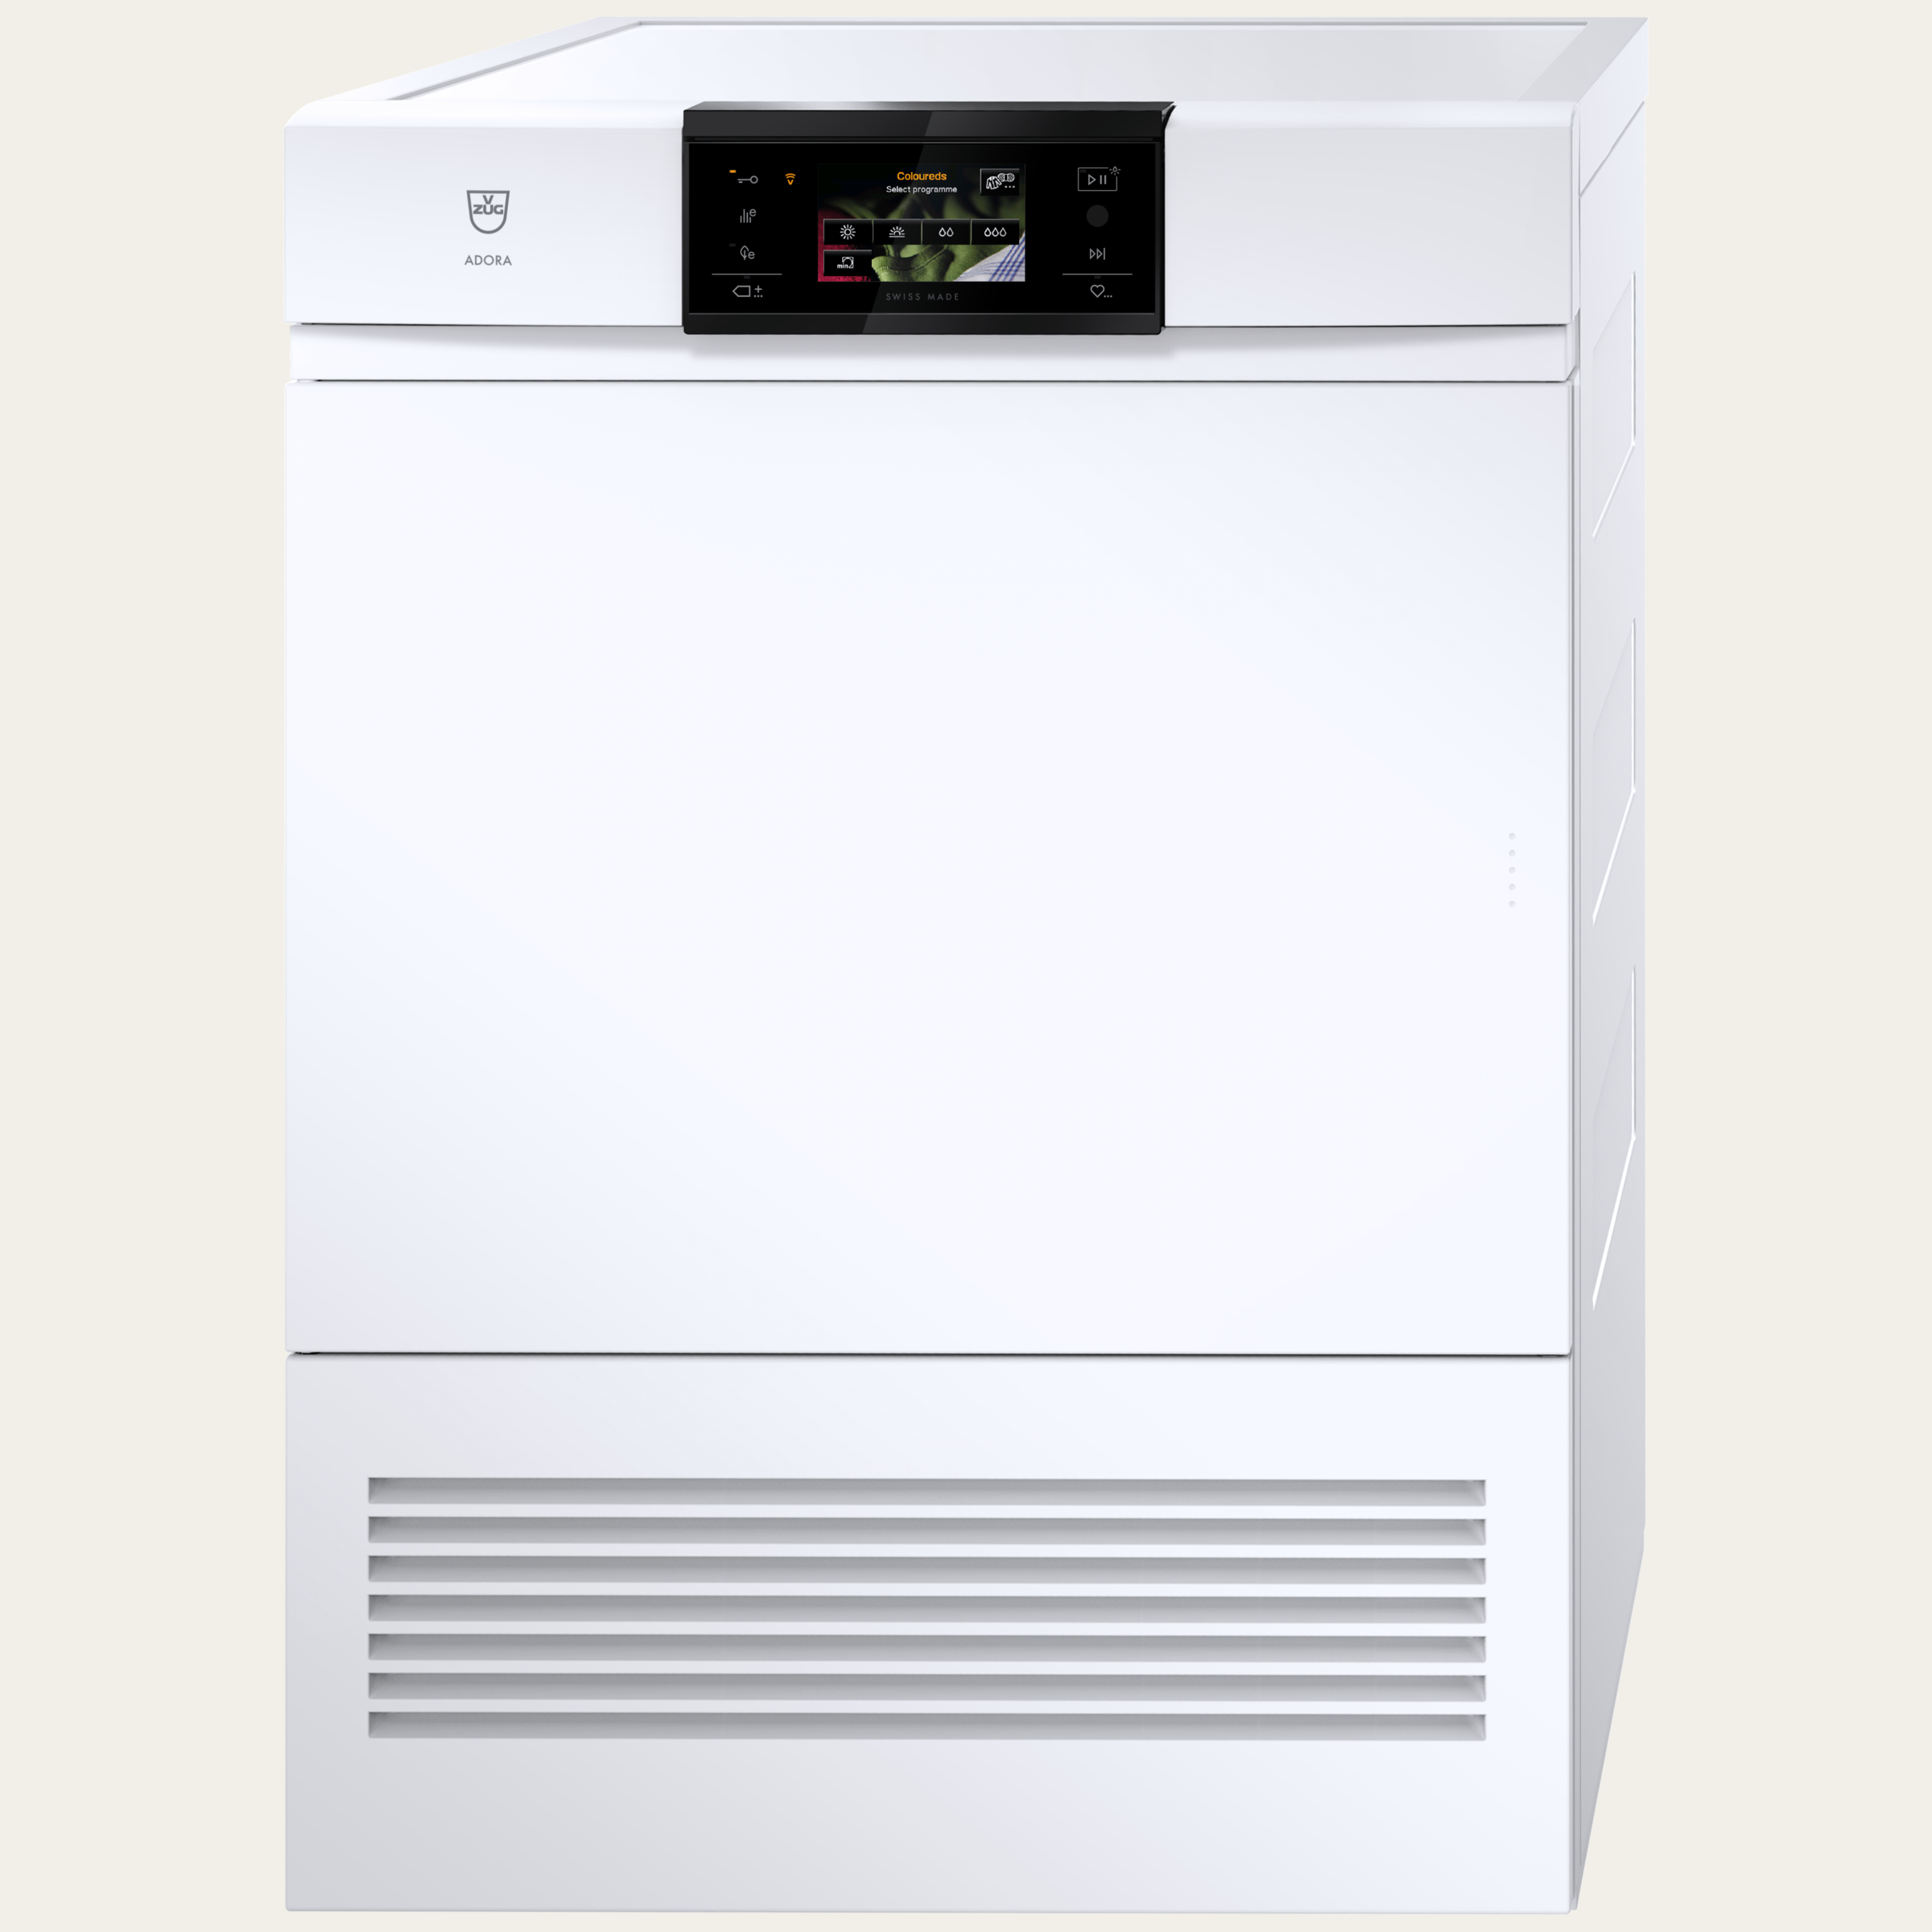 V-ZUG Tumble dryer AdoraDry V6000, Door hinge: Right, V-ZUG-Home, Nominal capacity: 7 kg, Full-colour graphic display, Air transport according to UN 3358 prohibited